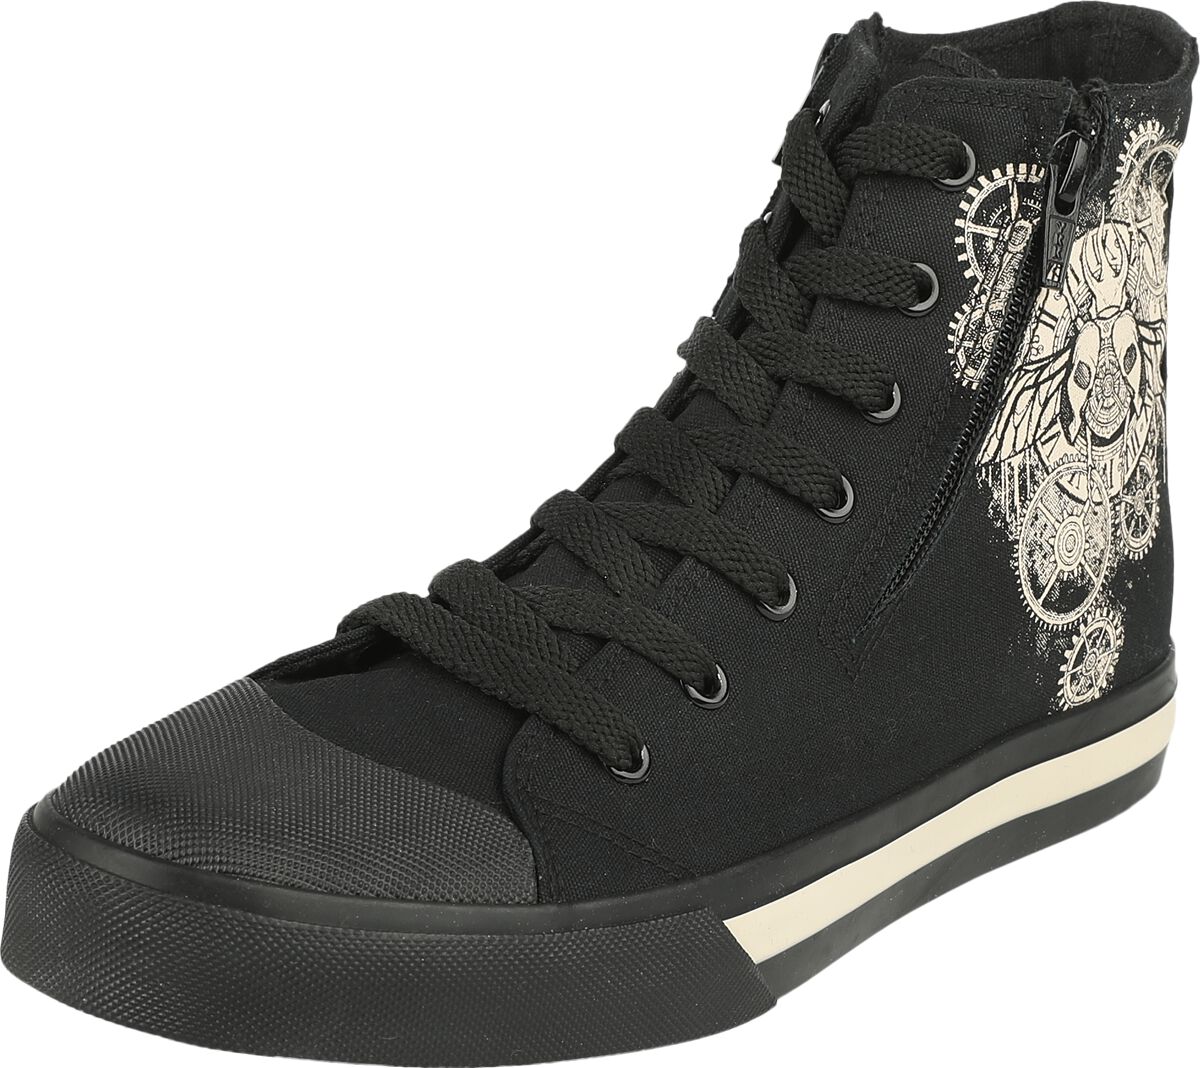 Image of Sneakers alte Gothic di Gothicana by EMP - Trainers with Industrial Beetle Print - EU37 a EU46 - Unisex - nero